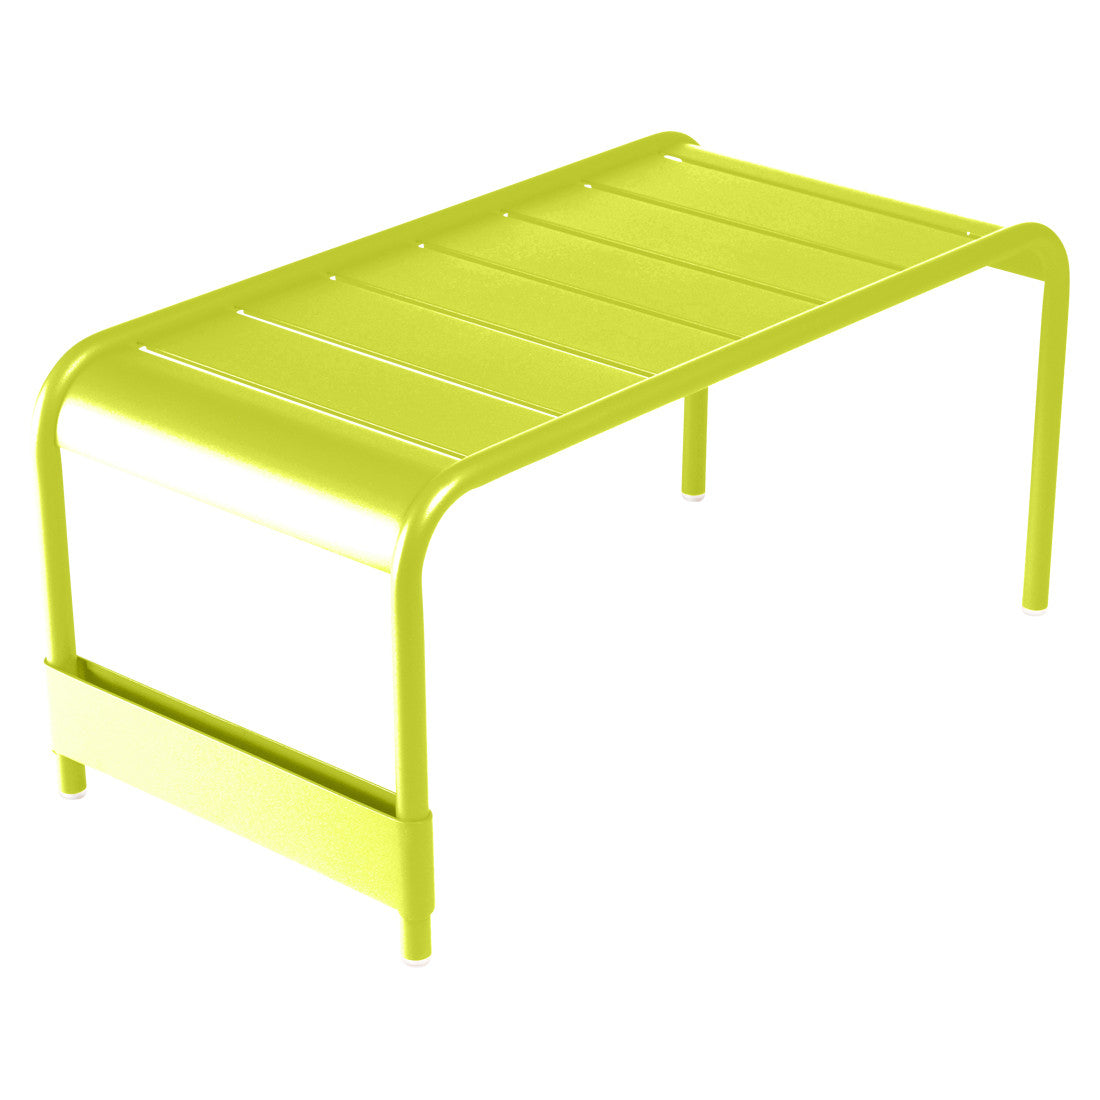 Fermob Luxembourg Large Low Table/Garden Bench - bonmarche